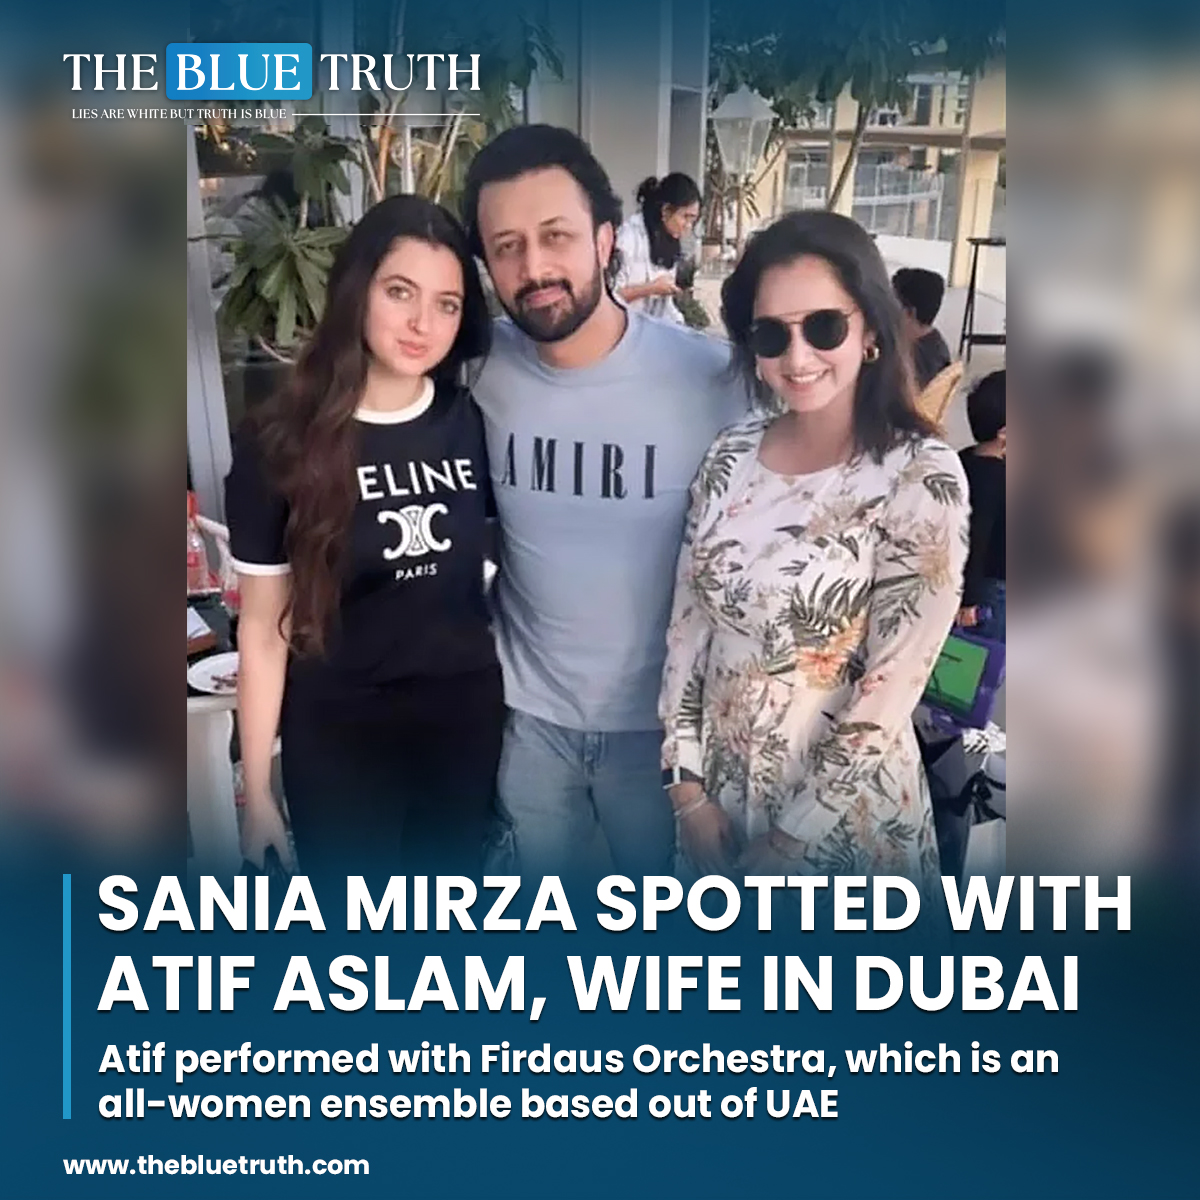 The concert was not only a musical treat but also showcased the camaraderie between Atif, Sania, and Sara, creating a memorable evening for fans in attendance.
#AtifAslam #SaniaMirza #ConcertNight #MusicalMagic #UAEConcert #SaraBharwana #FirdausOrchestra #tbt #TheBlueTruth